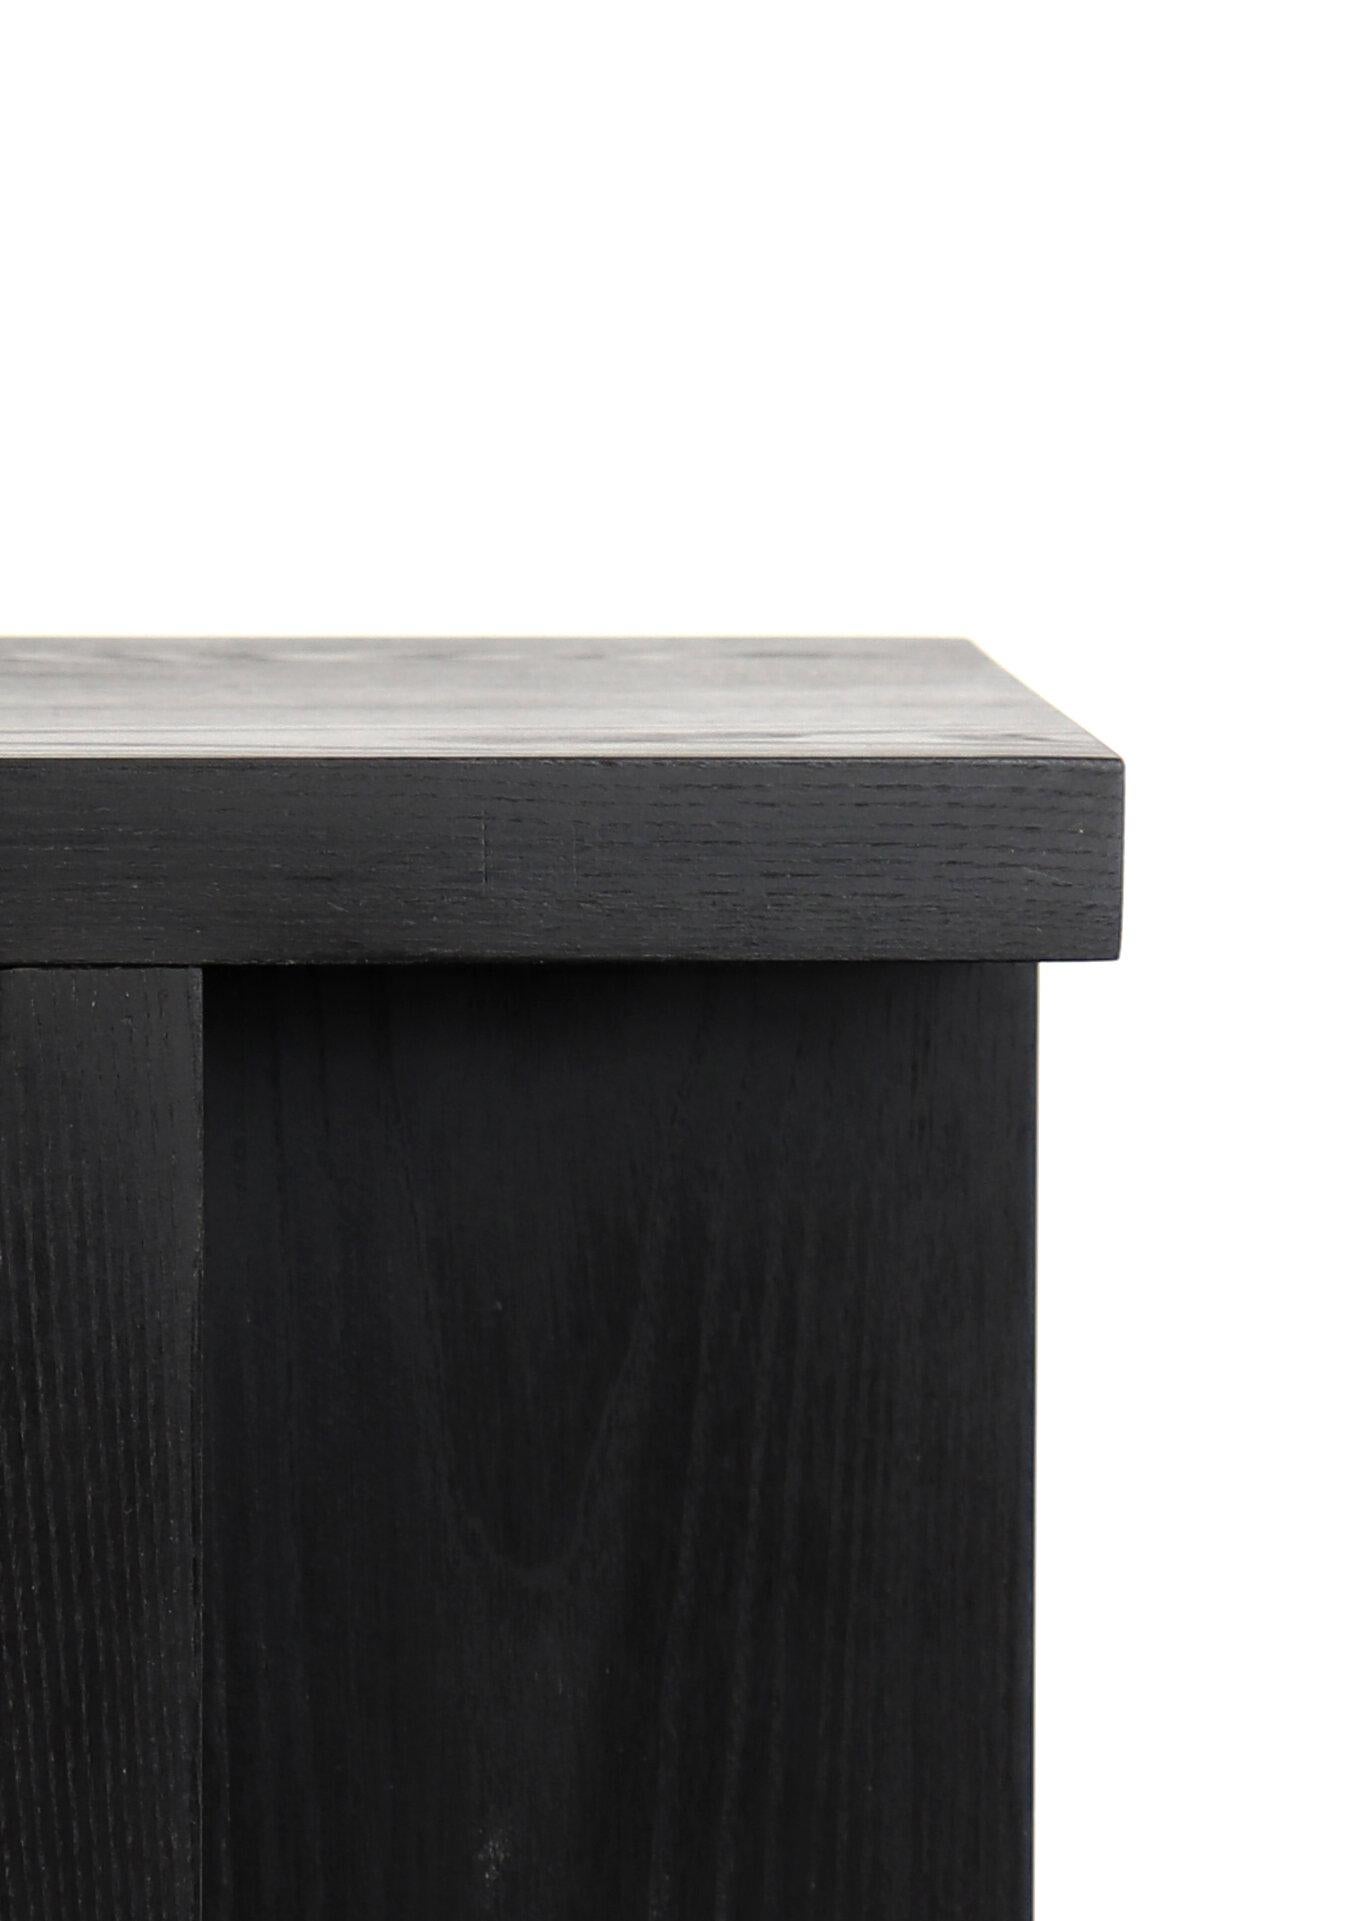 Solid wood stool / side table in blackened ash with a square top. With a clean and minimal design, these stools are handmade in Portland, Oregon using mortise and tenon joinery in Material's workshop. Also available with a round top, in a number of